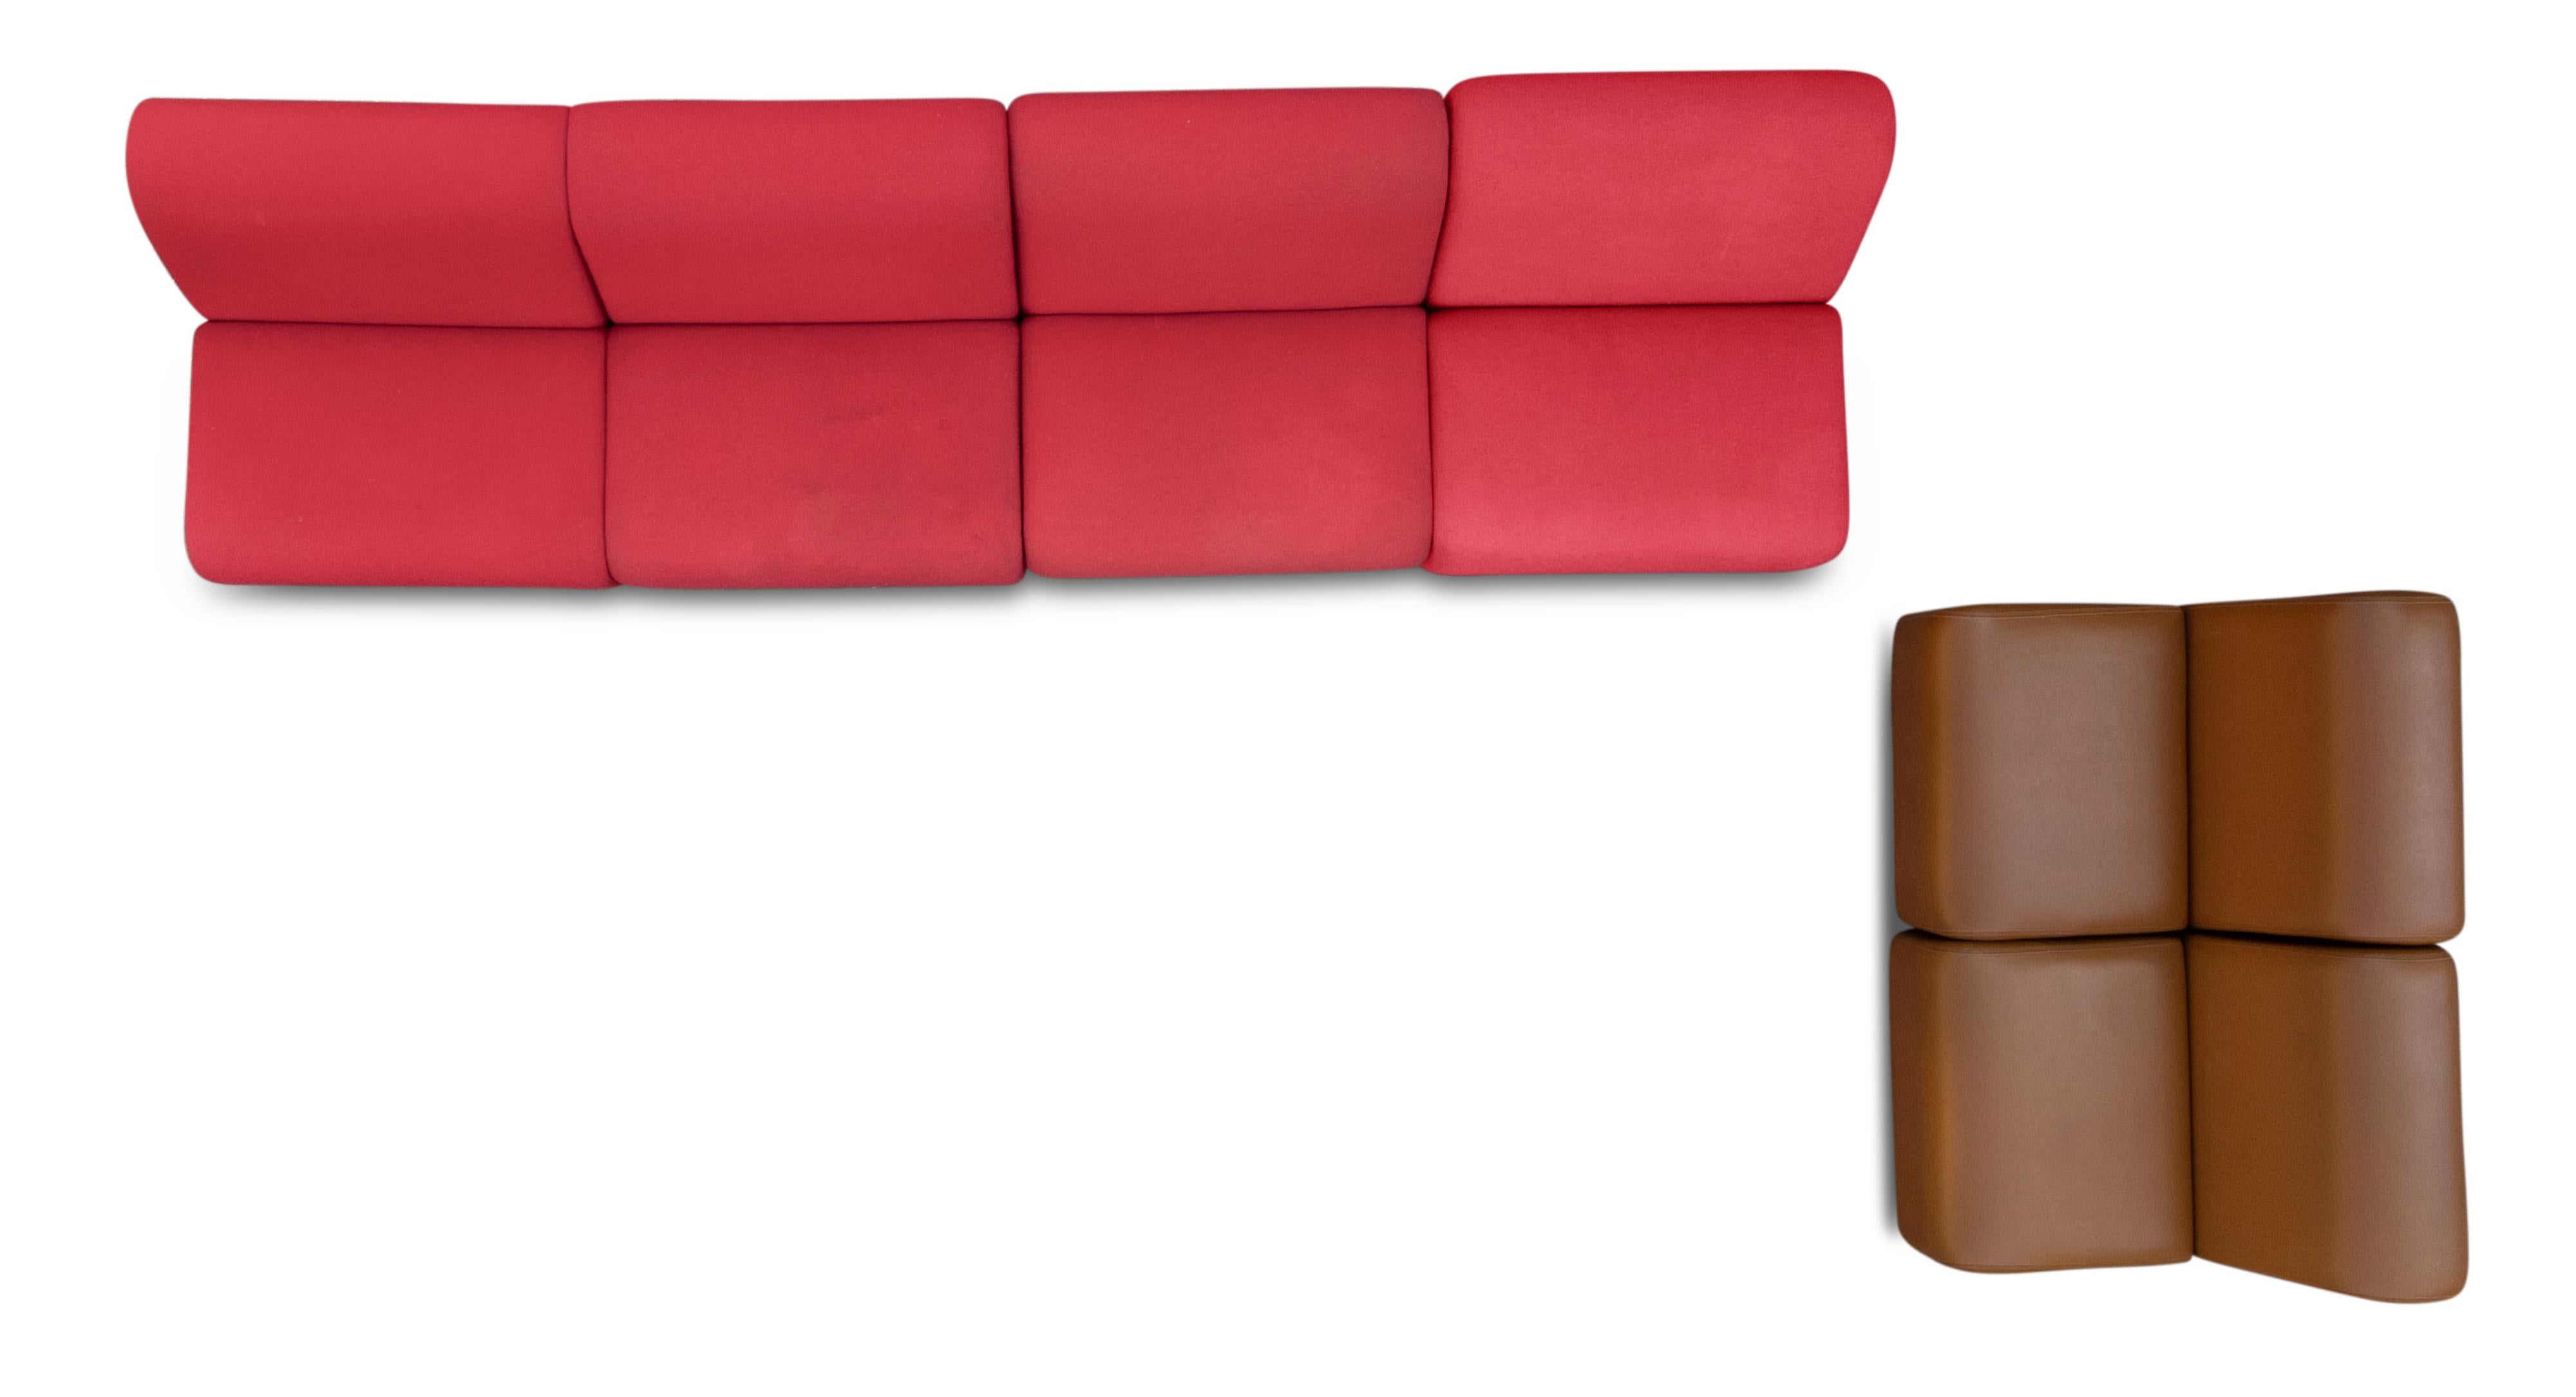 Late 20th Century John Mascheroni 6 Piece Sectional Sofa for Vecta Contract Red & Brown Upholstery For Sale